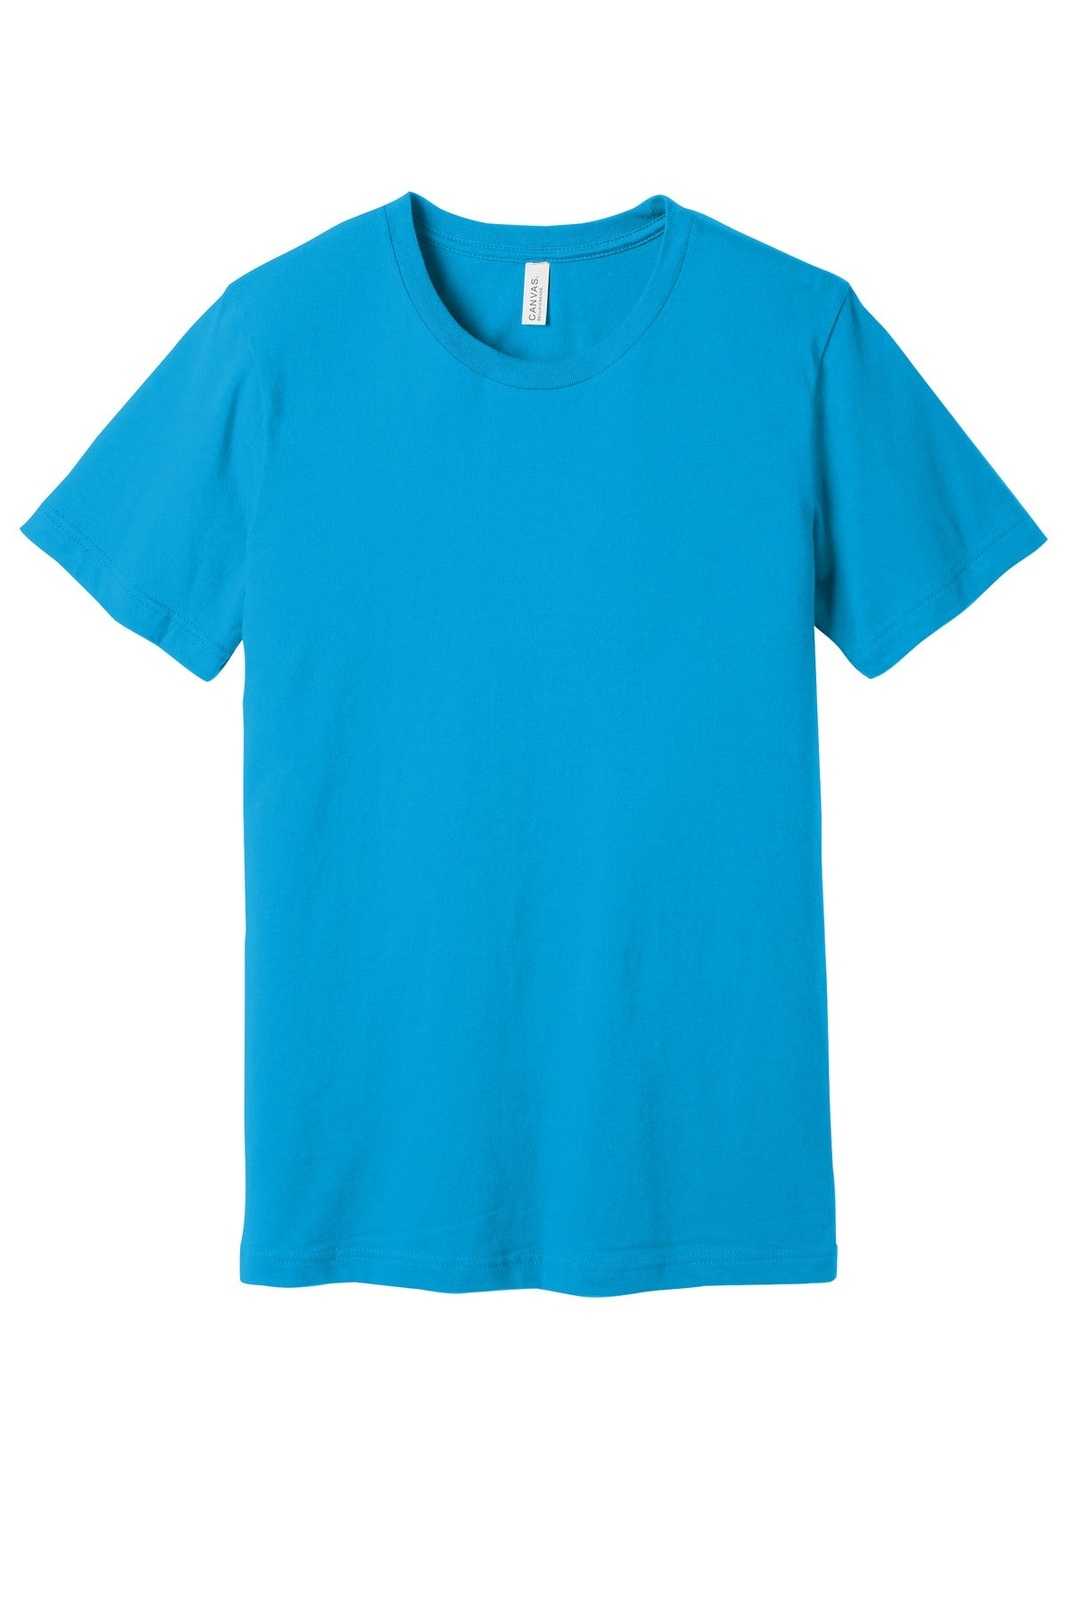 Bella + Canvas 3001 Unisex Jersey Short Sleeve Tee - Turquoise - HIT a Double